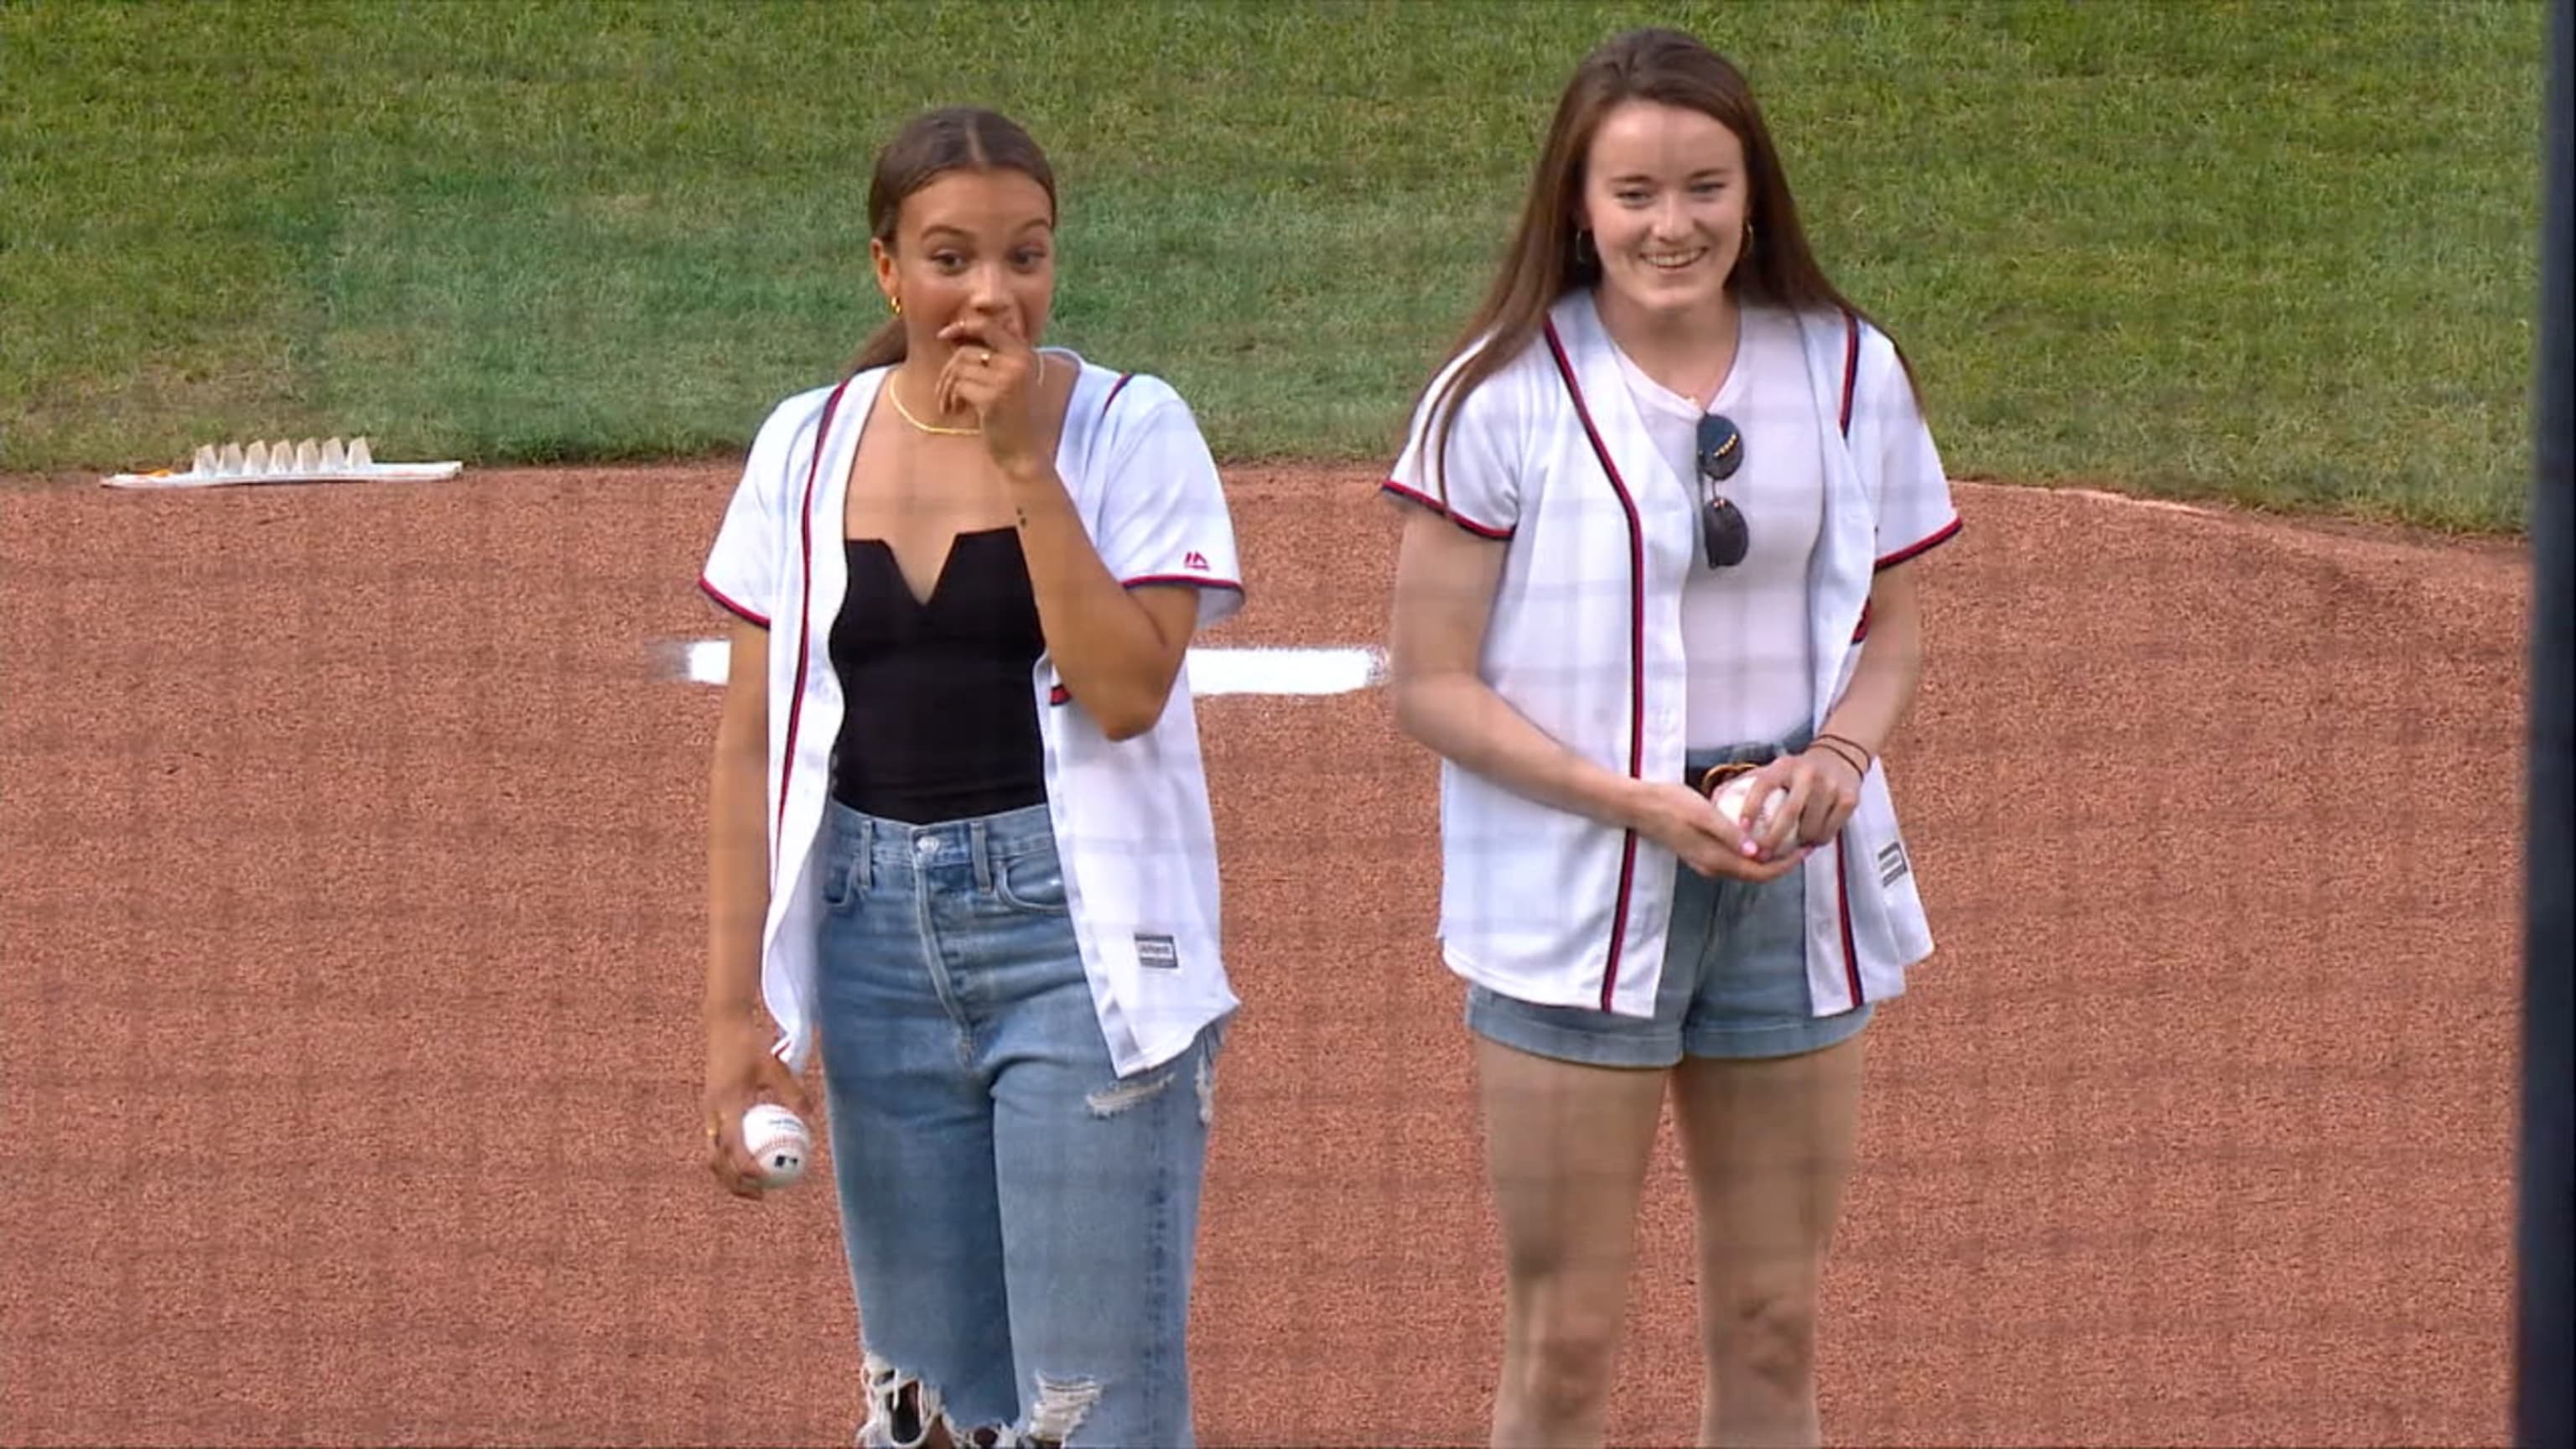 Mallory Pugh, Rose Lavelle throw first pitch